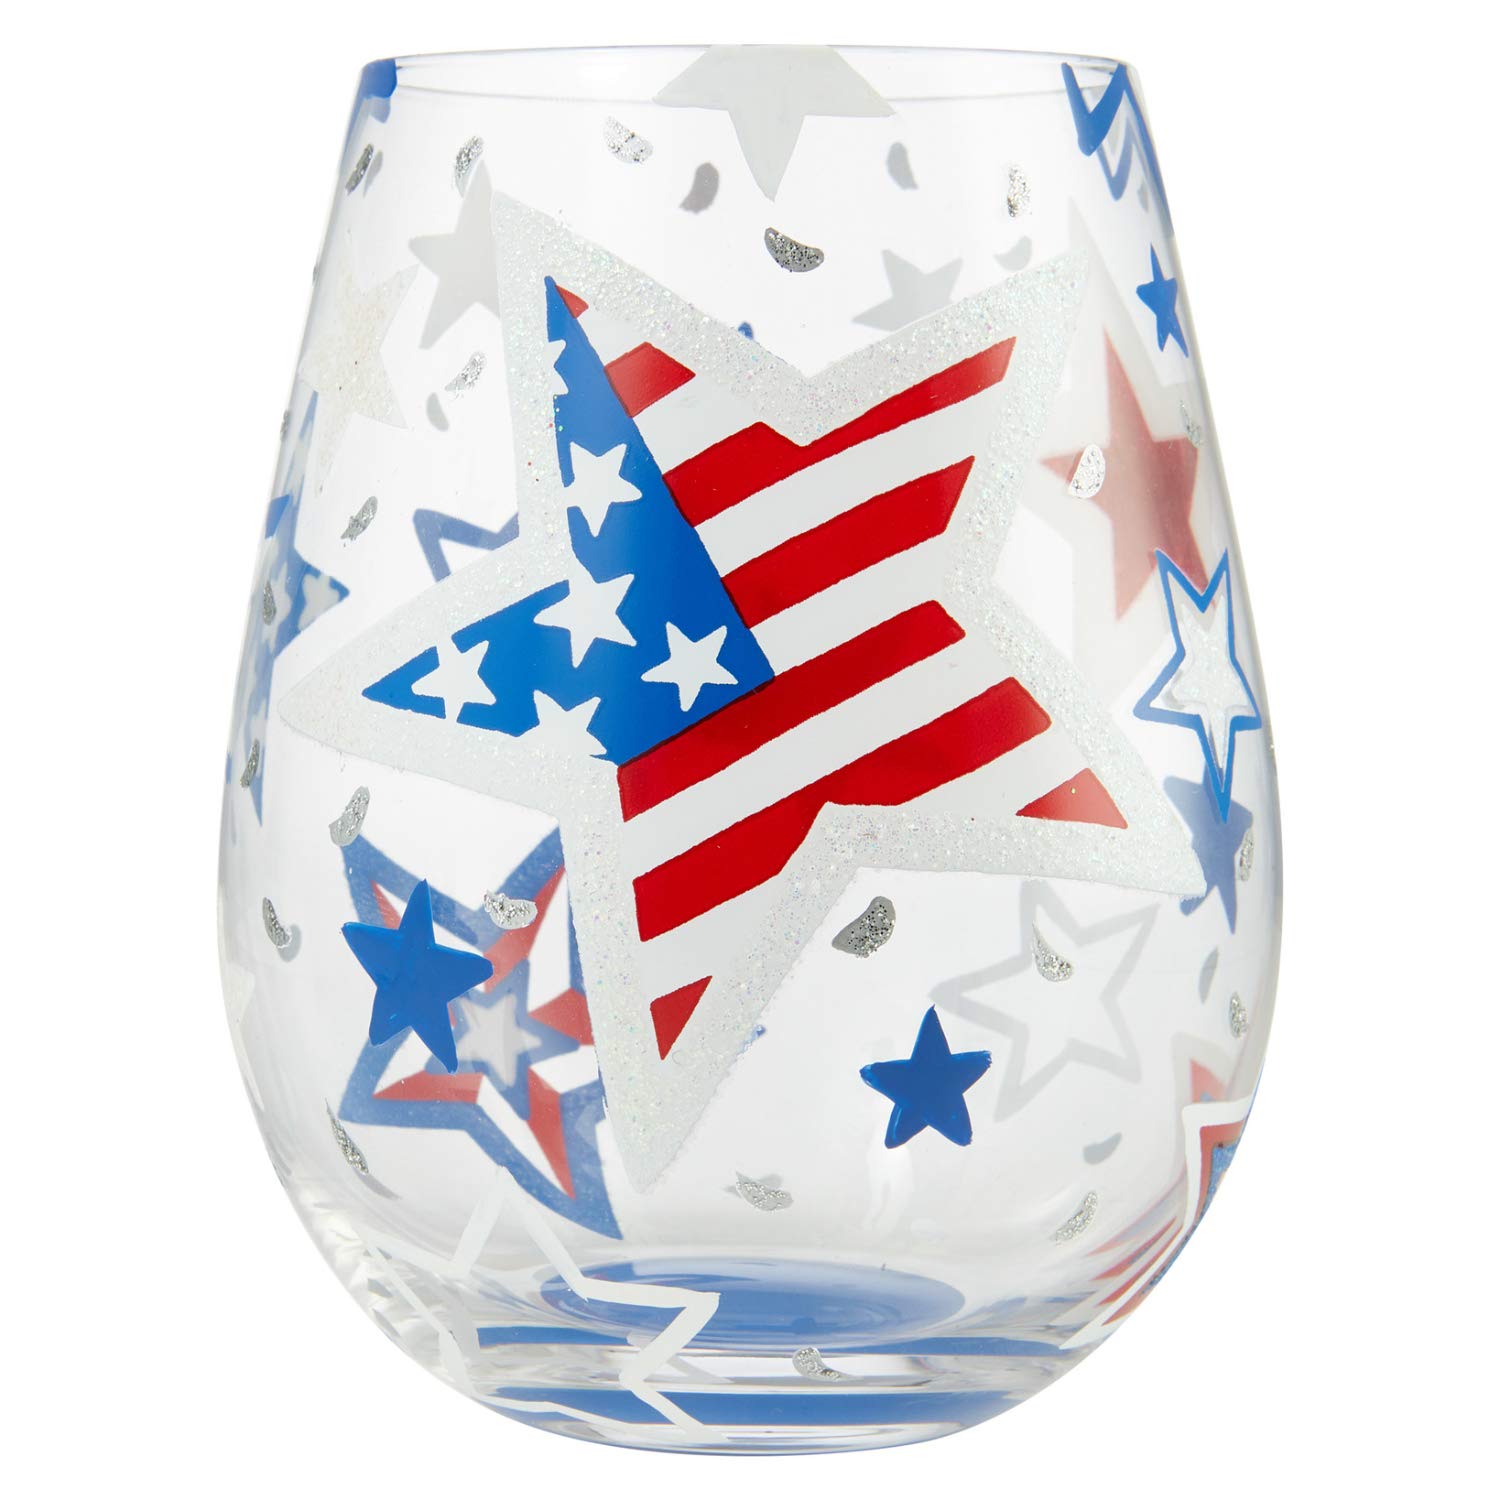 Enesco Designs by Lolita Home of The Brave Artisan Stemless Wine Glass, 1 Count (Pack of 1), Multicolor